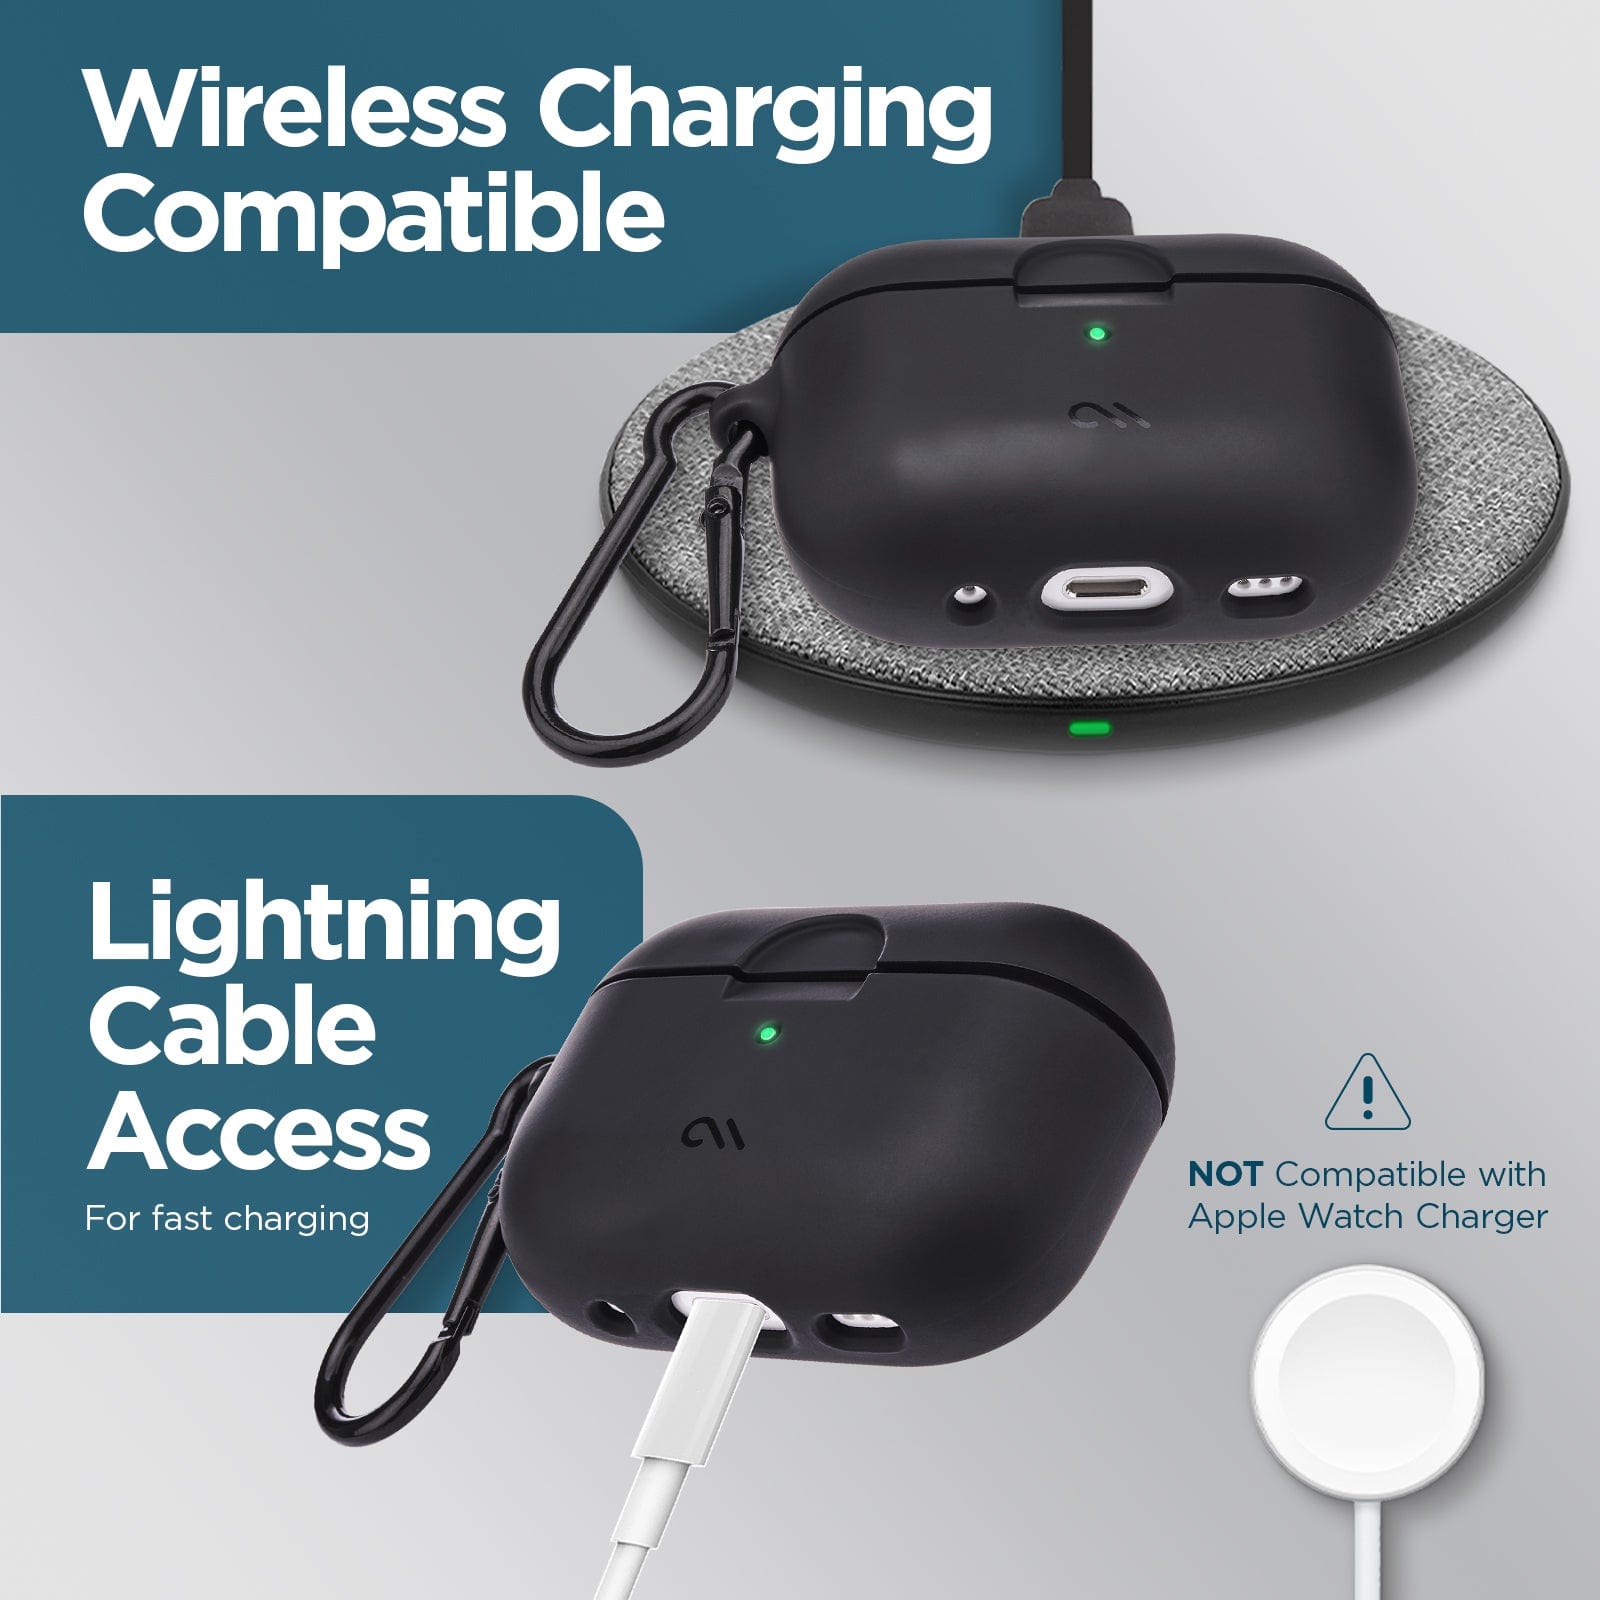 WIRELESS CHARGING COMPATIBLE. LIGHTNING CABLE ACCESS FOR FAST CHARGING. NOT COMPATIBLE WITH APPLE WATCH CHARGER